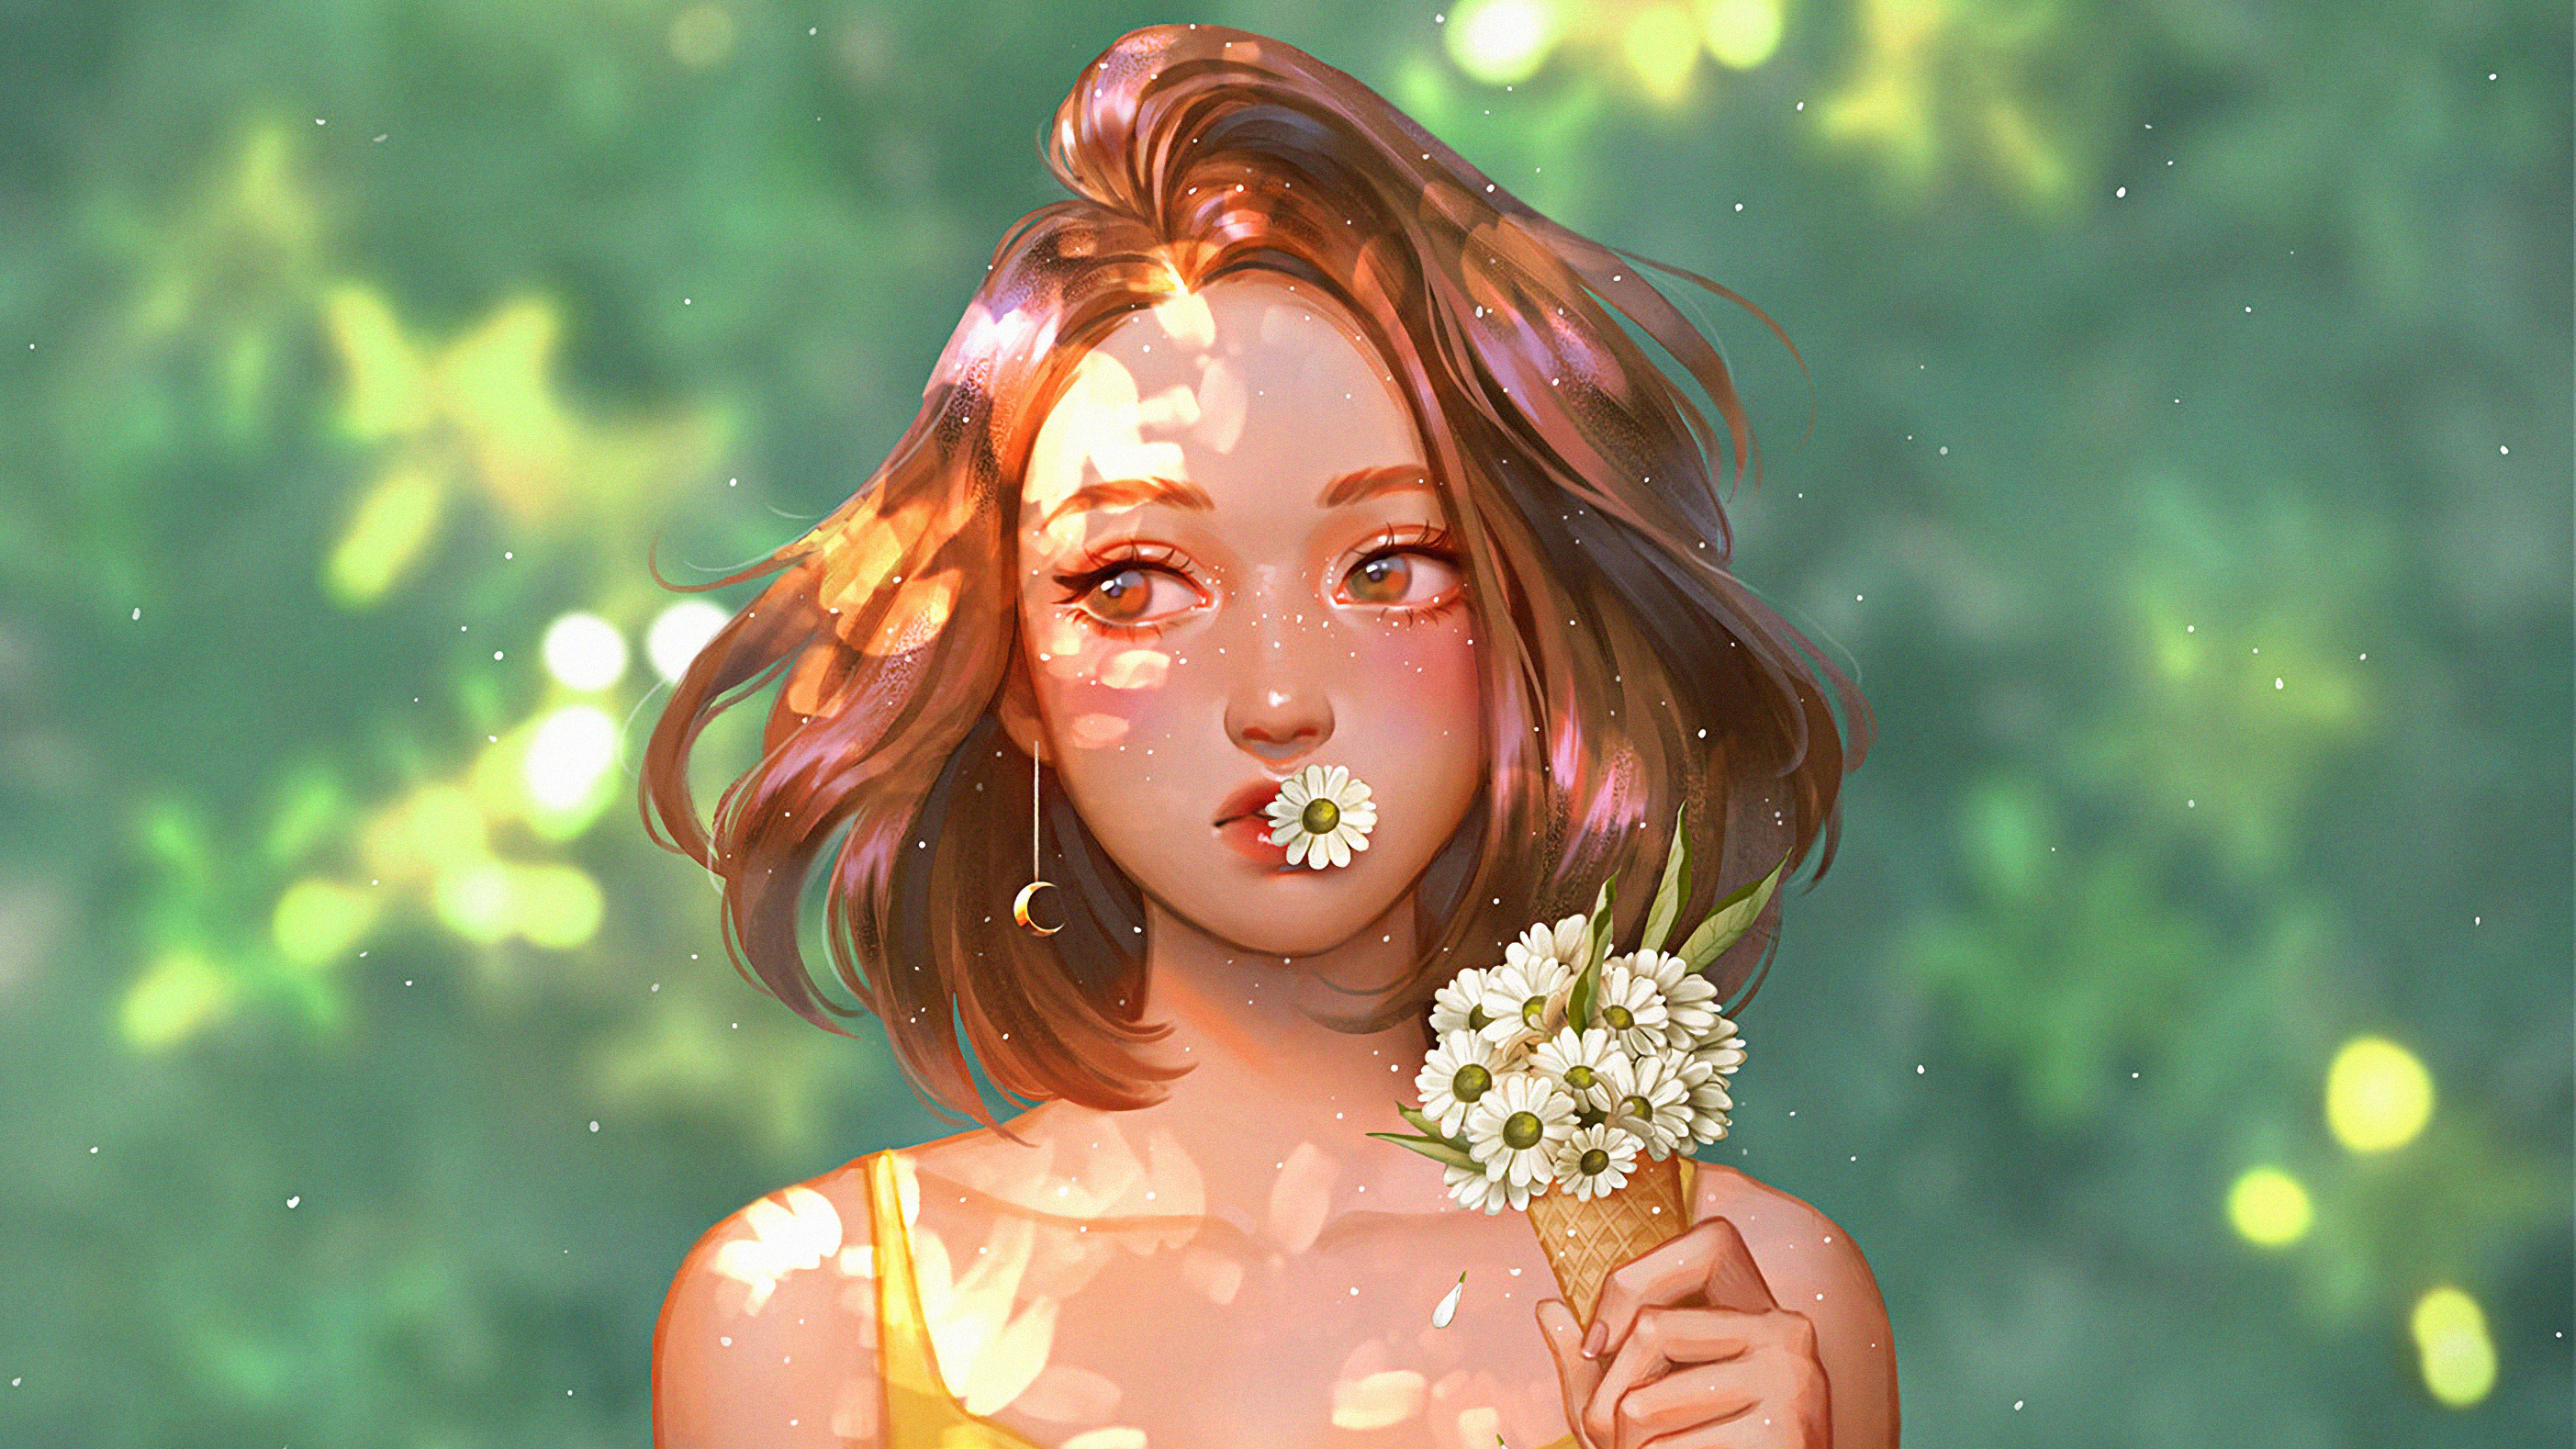 Girl With Daisy Flowers, HD Artist, 4k Wallpapers, Images, Backgrounds,  Photos and Pictures